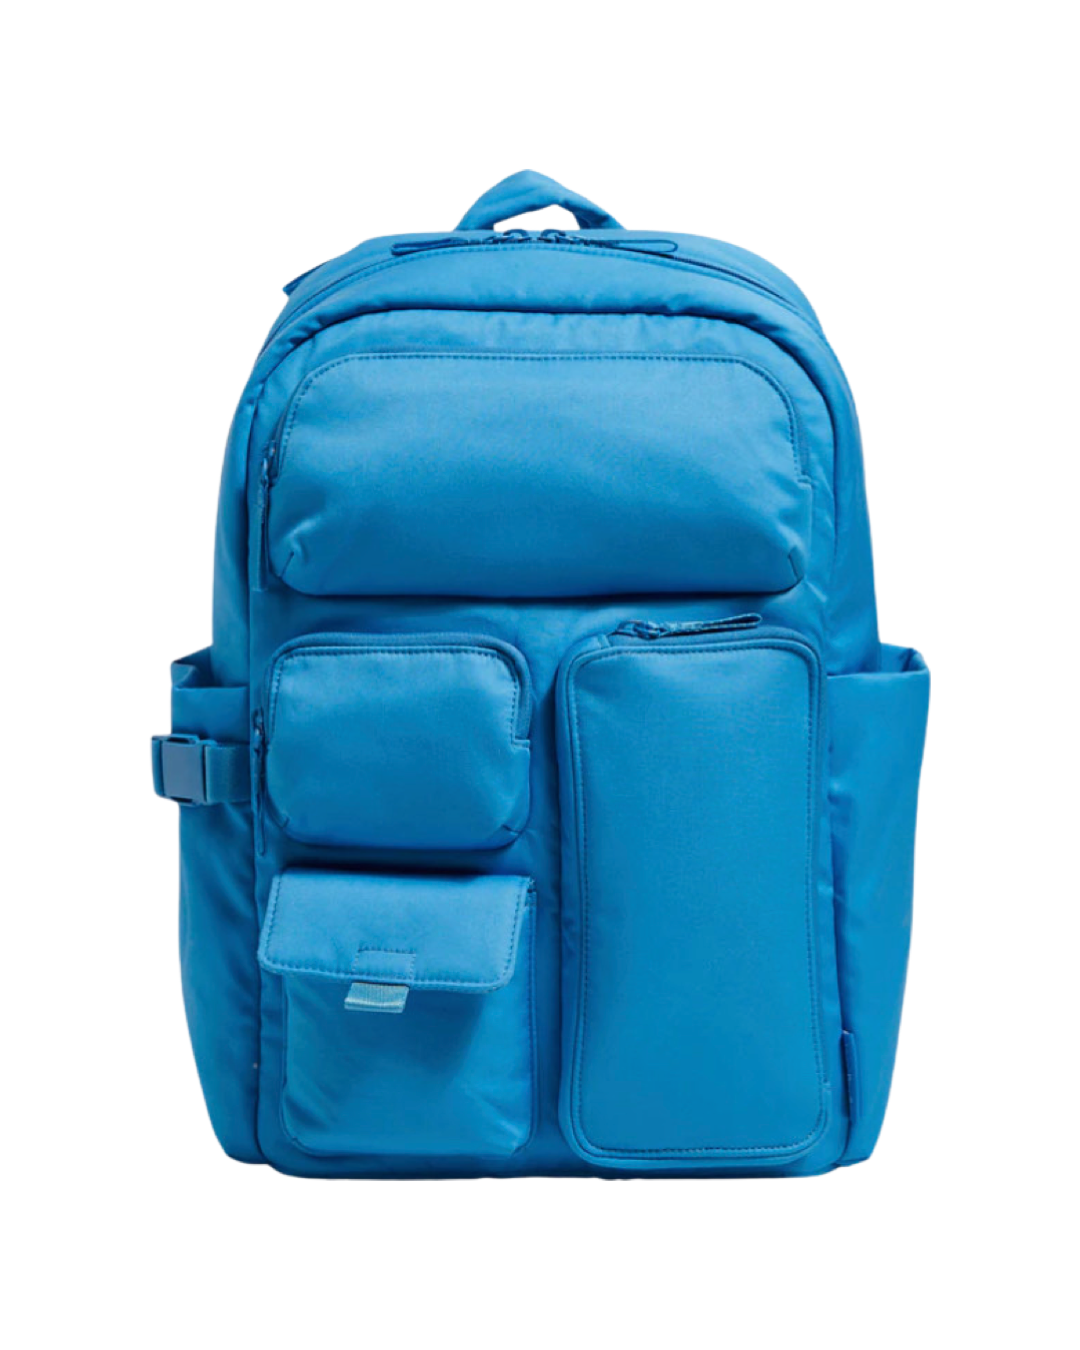 Recycled Backpack - 12 inch Teal & Yellow